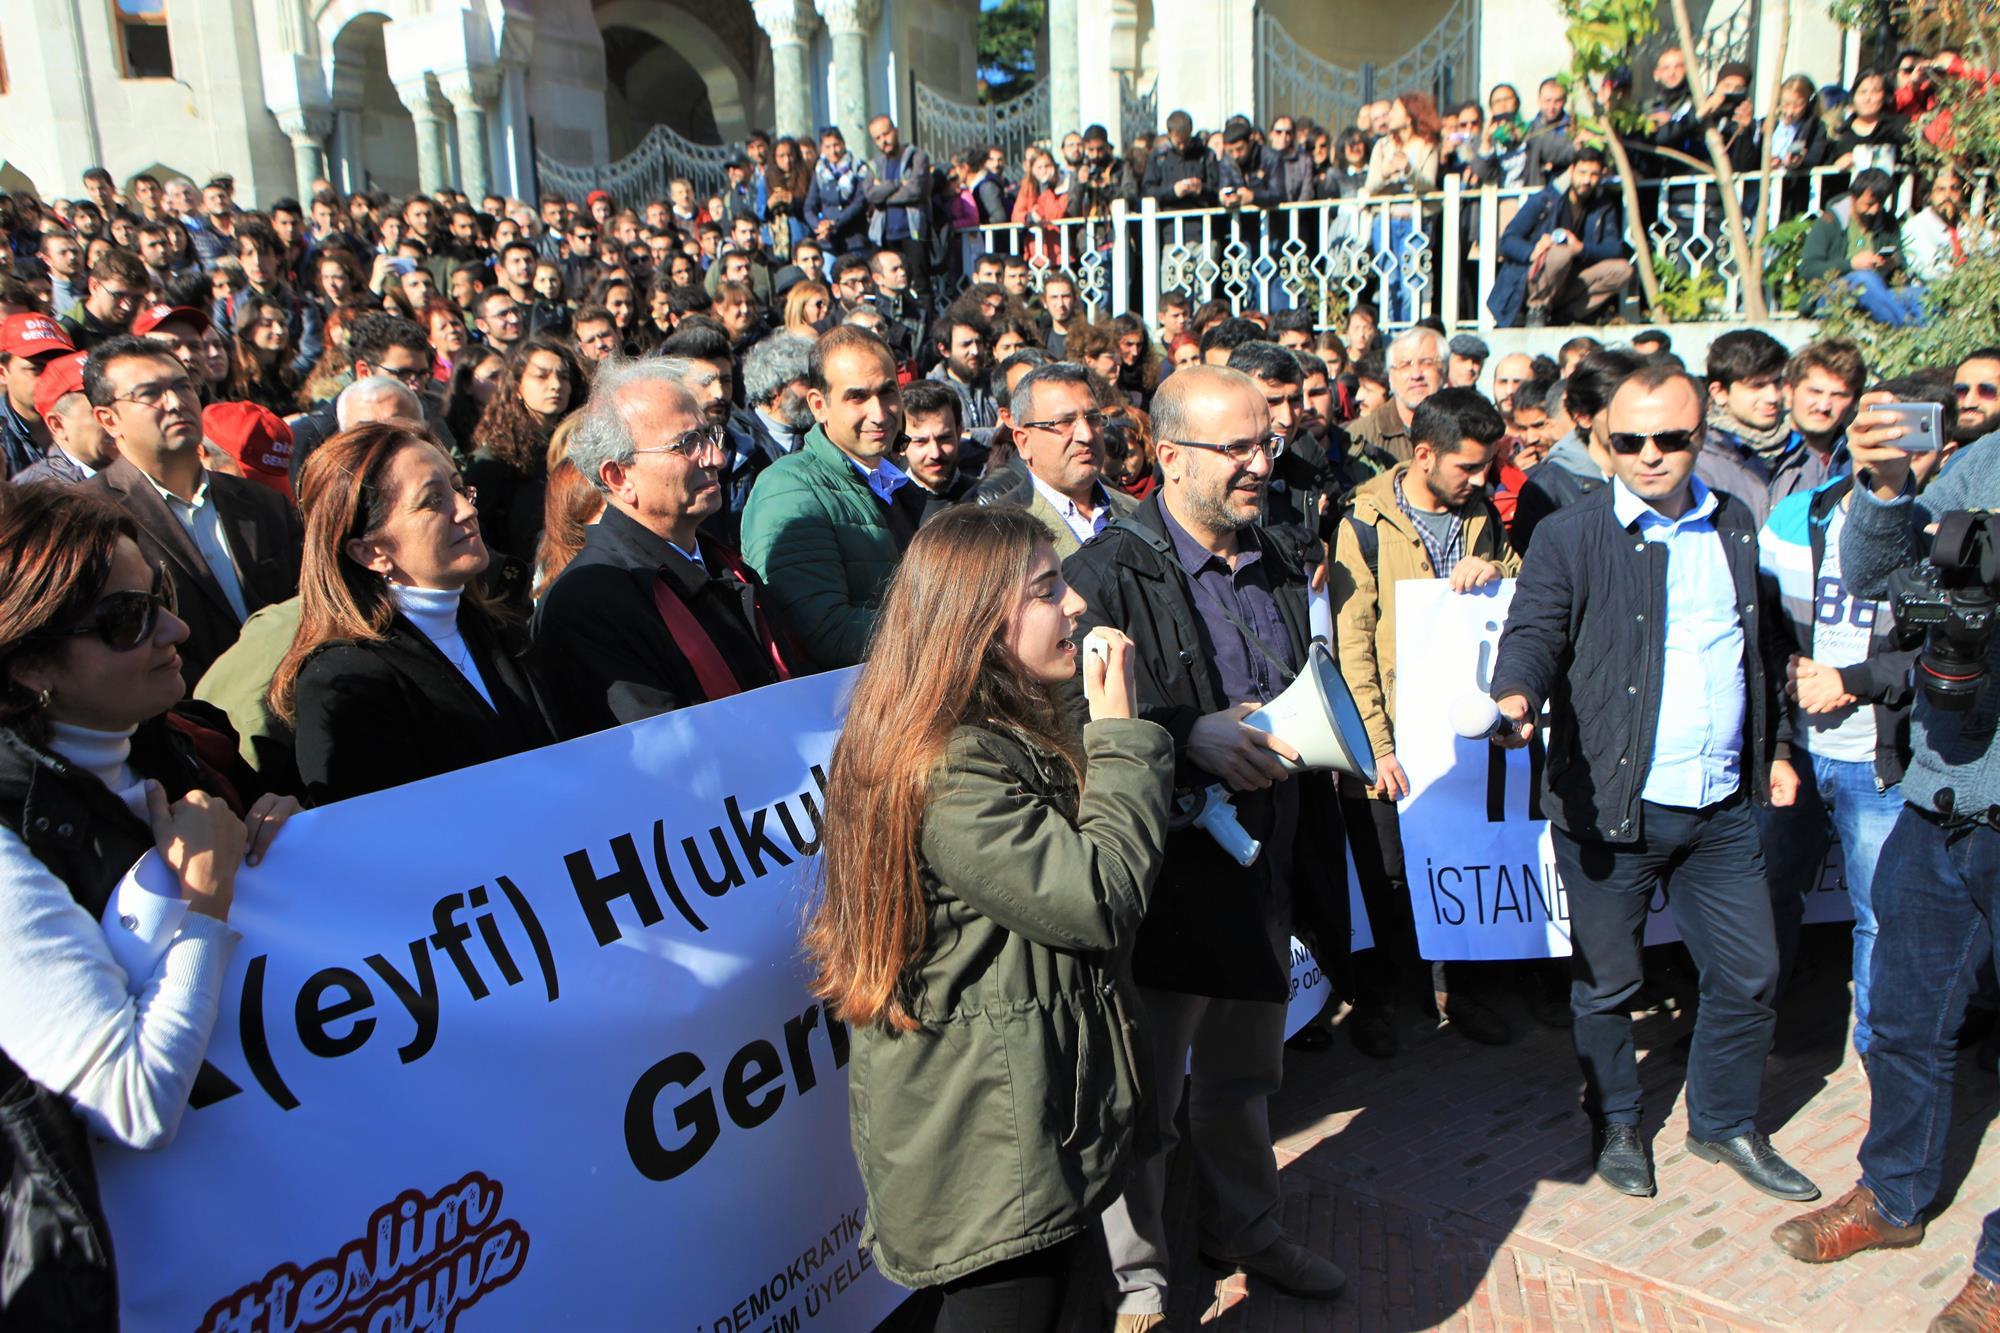 purged academics protest their dismissal in Turkey